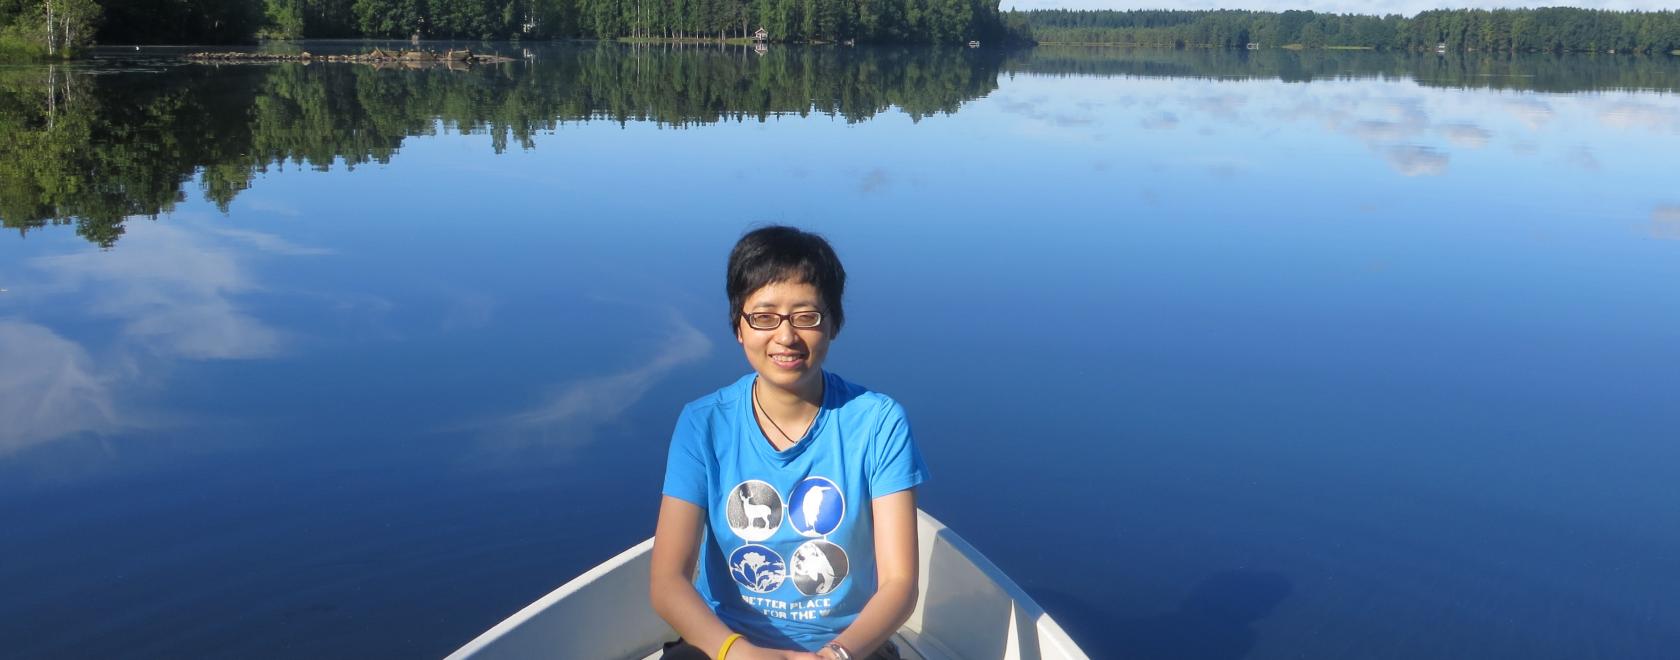 Originally from China, and a Finnish resident since 2011, Shupin Li received her PhD in November 2019 studying digitalization and learning at the University of Turku.